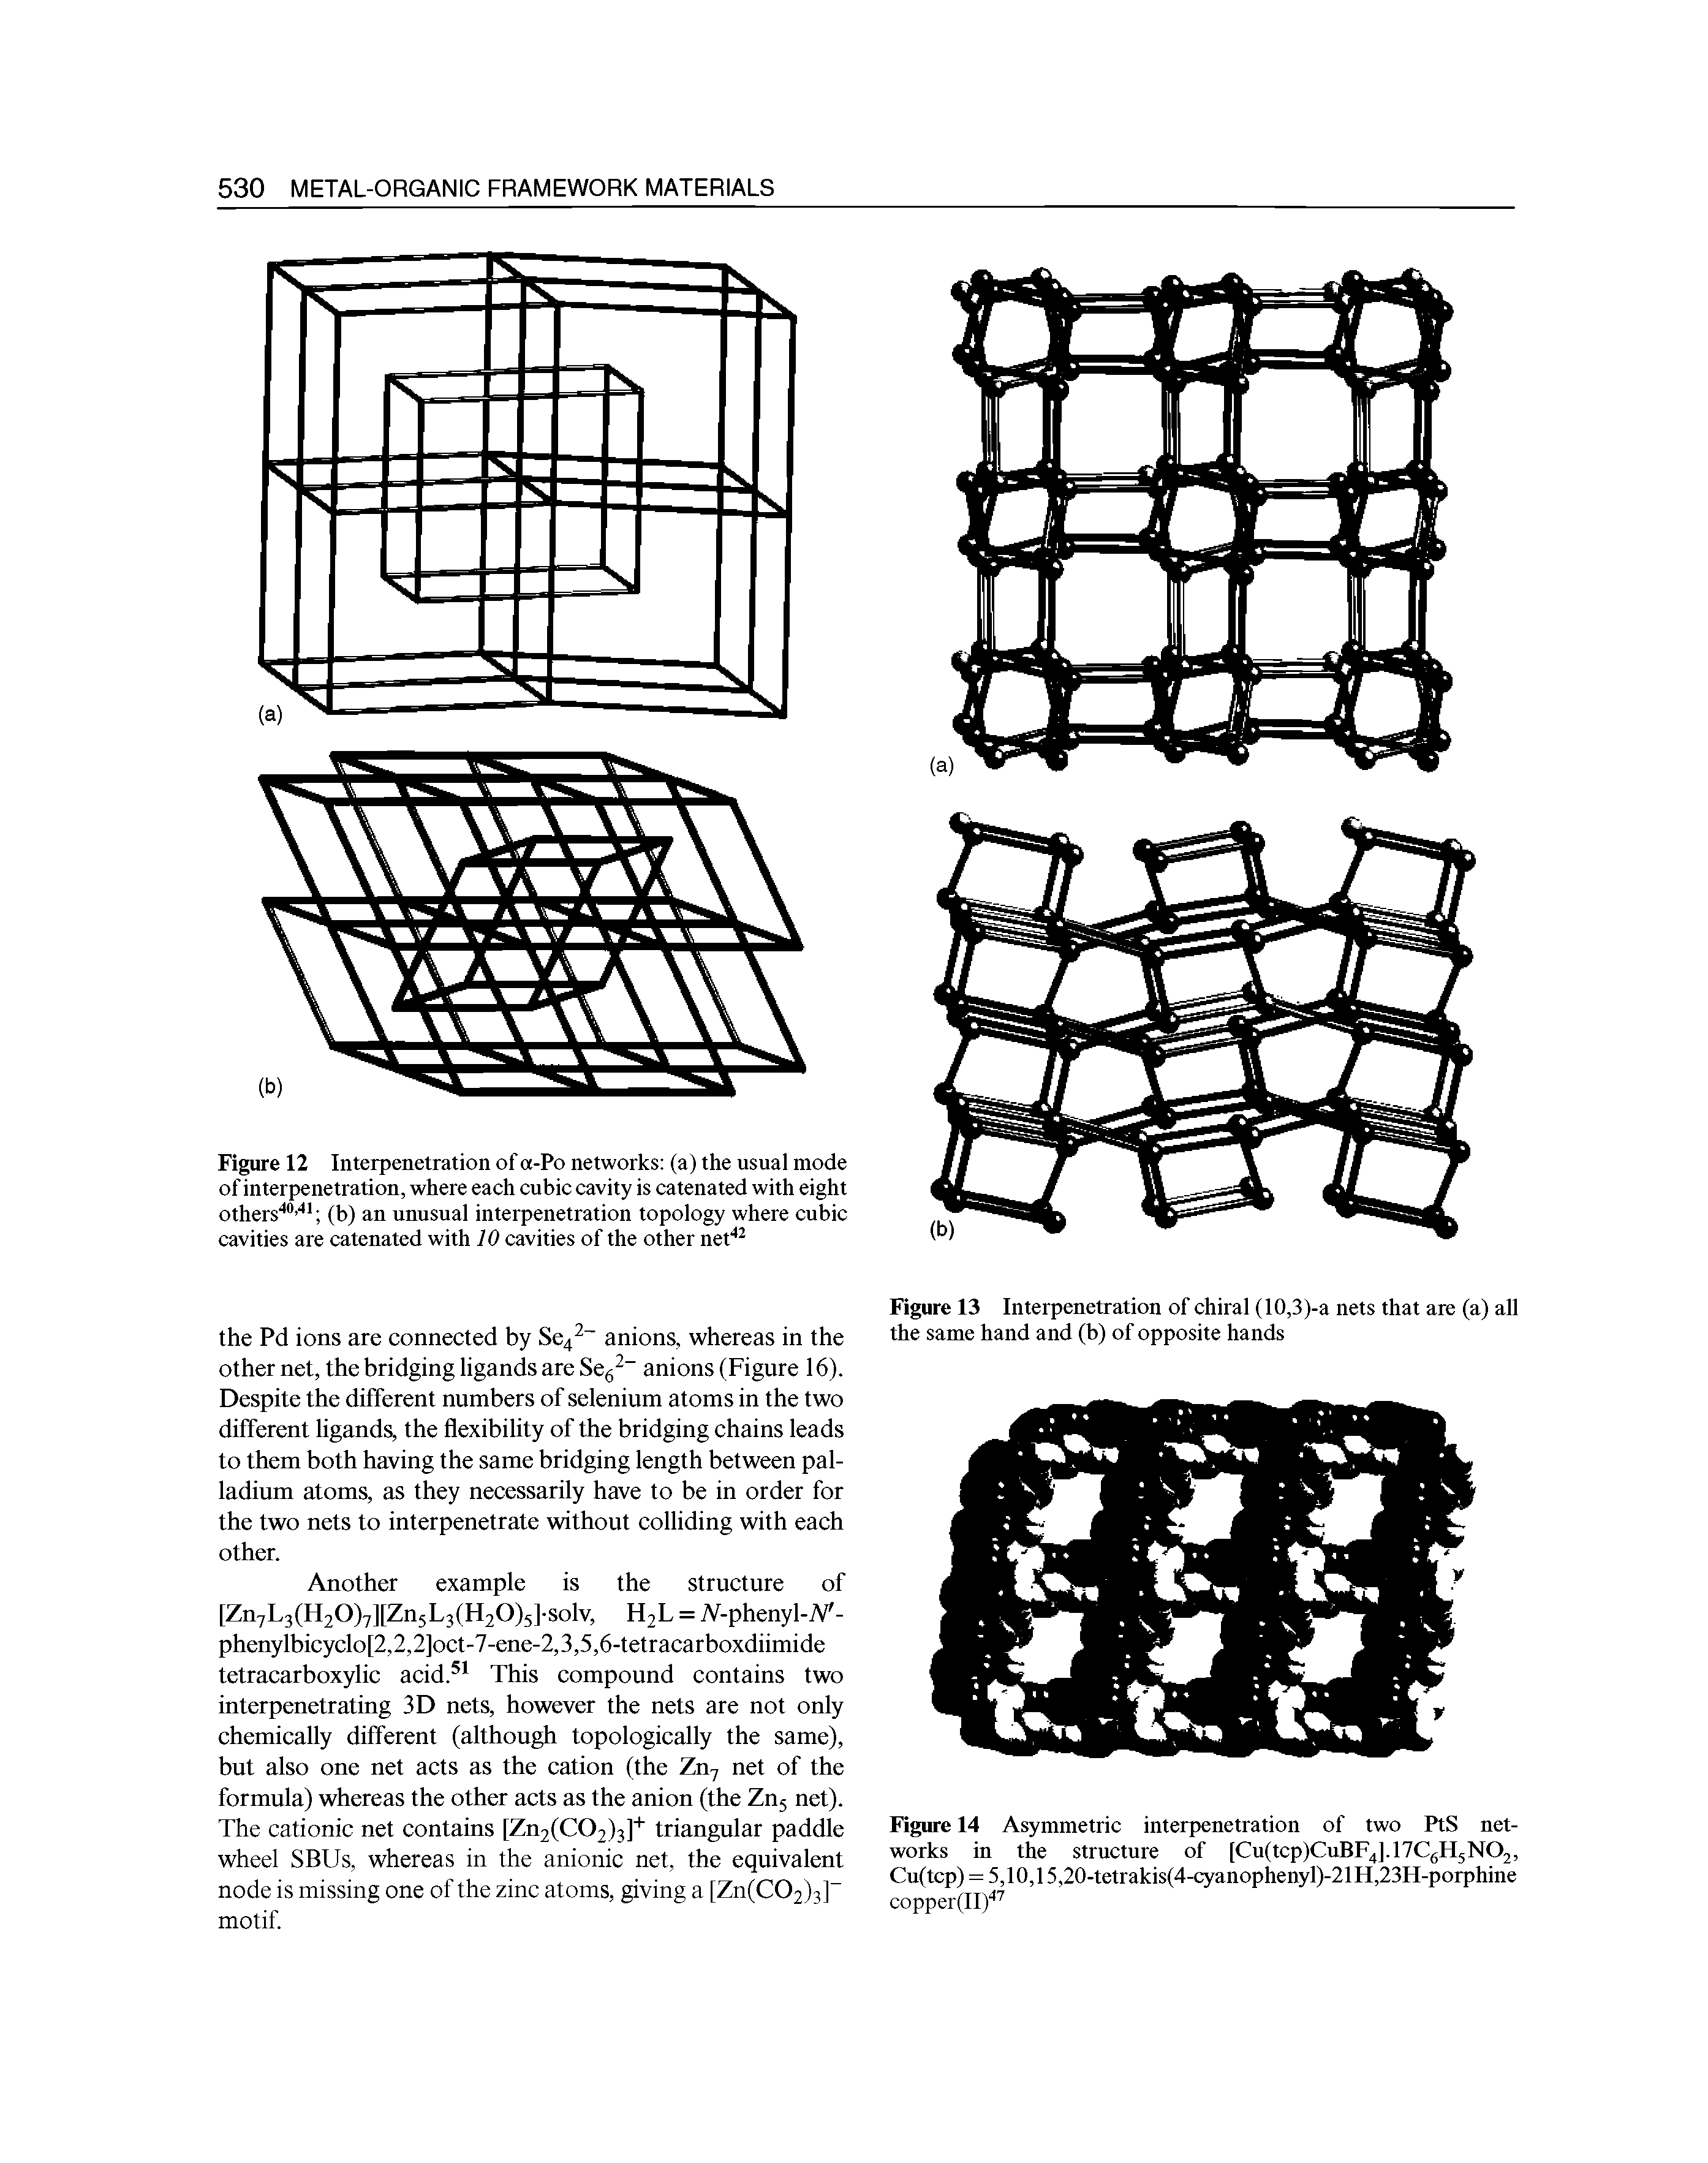 Figure 12 Interpenetration of a-Po networks (a) the usual mode of interpenetration, where each cubic cavity is catenated with eight others (b) an unusual interpenetration topology where cubic cavities are catenated with 10 cavities of the other net ...